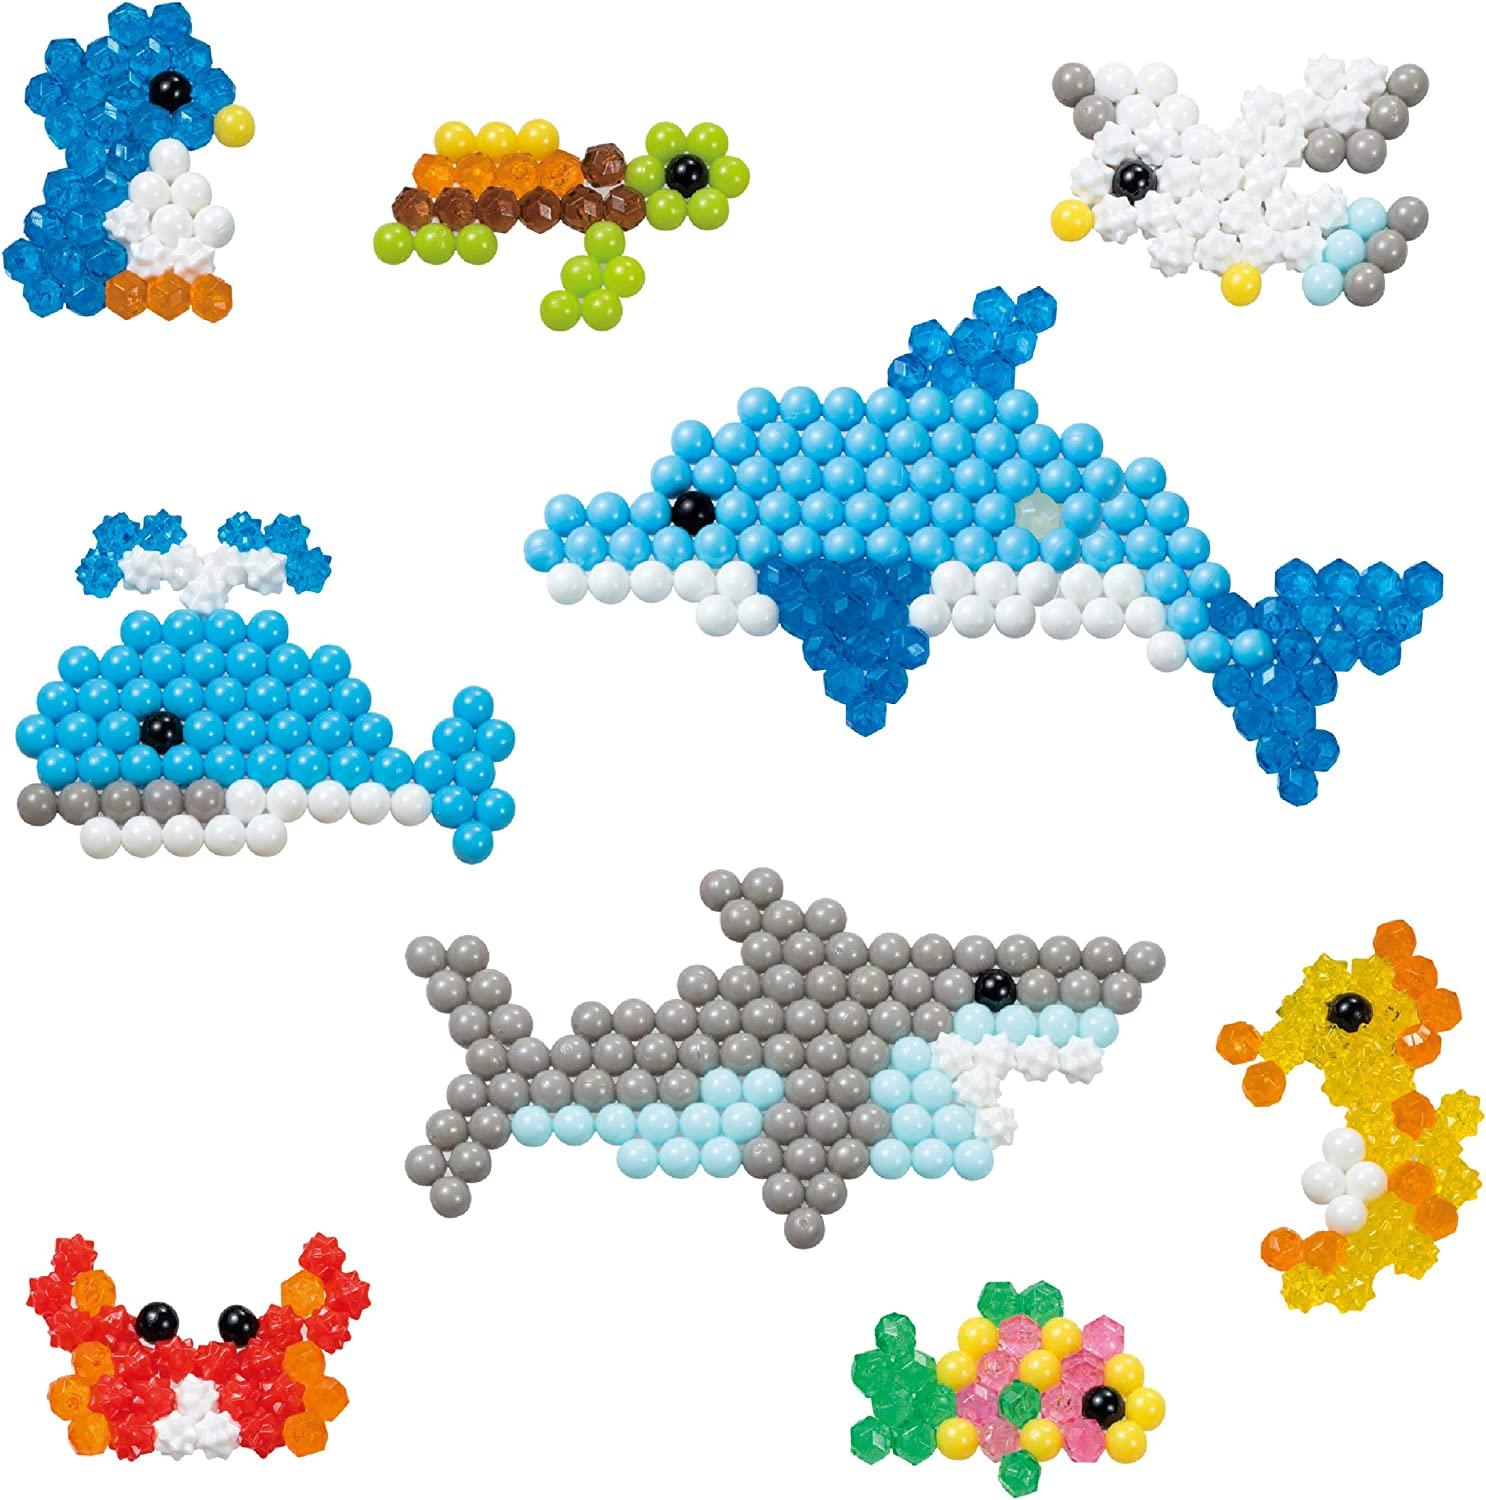 Aquabeads Arts & Crafts Pastel Fancy Theme Bead Refill with over 600 Beads  and Templates, Ages 4 and Up